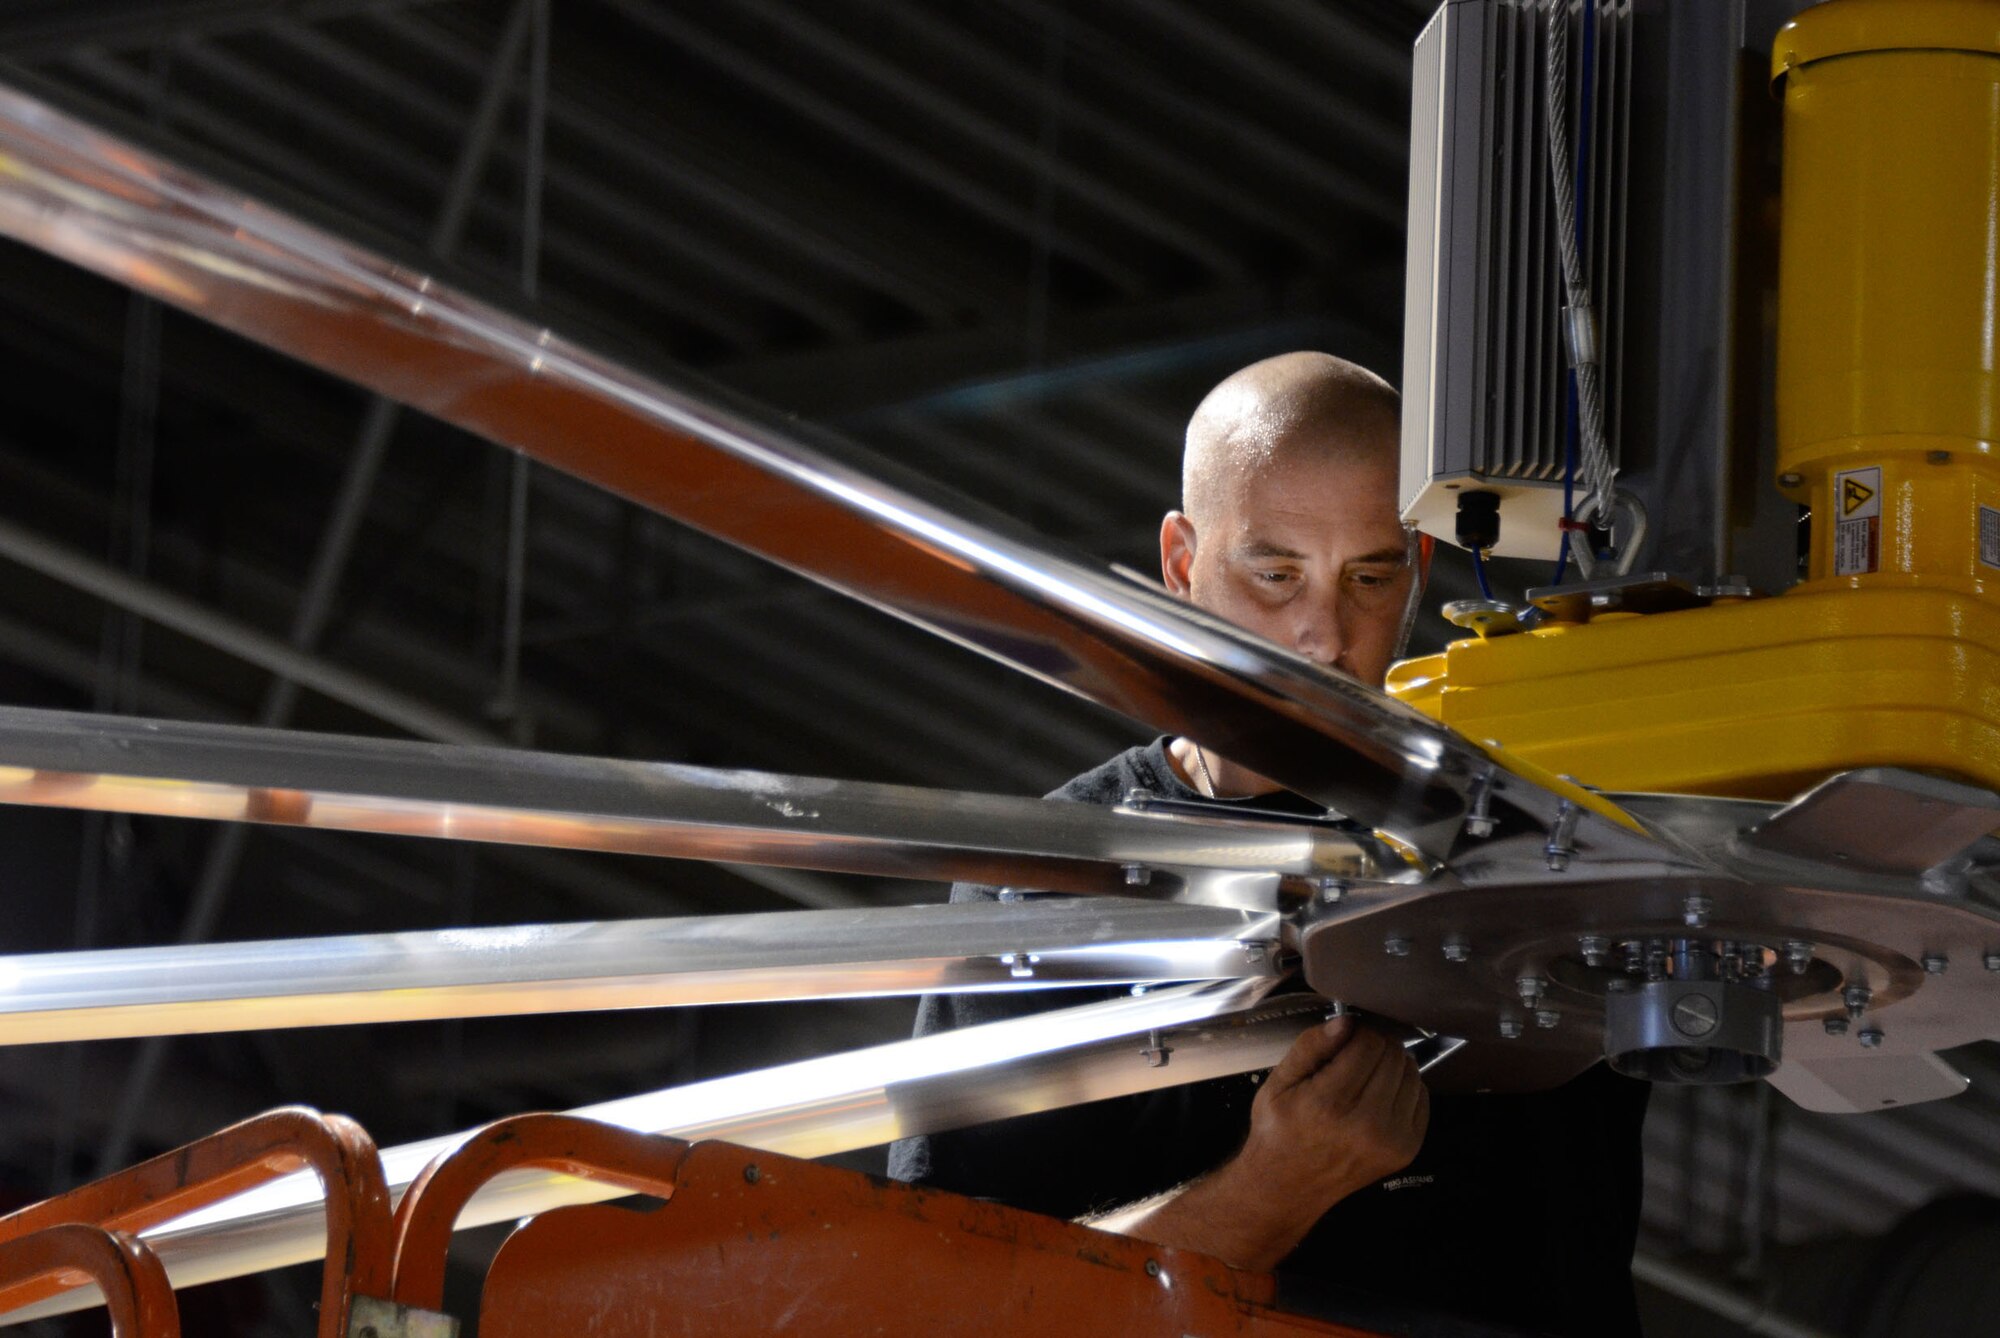 A member of the installation crew secures the fan blades of large 24-foot fans mounted on the ceiling of bay 3 in the maintenance hangar here Oct. 27. (U.S. Air Force photo/Don Peek)